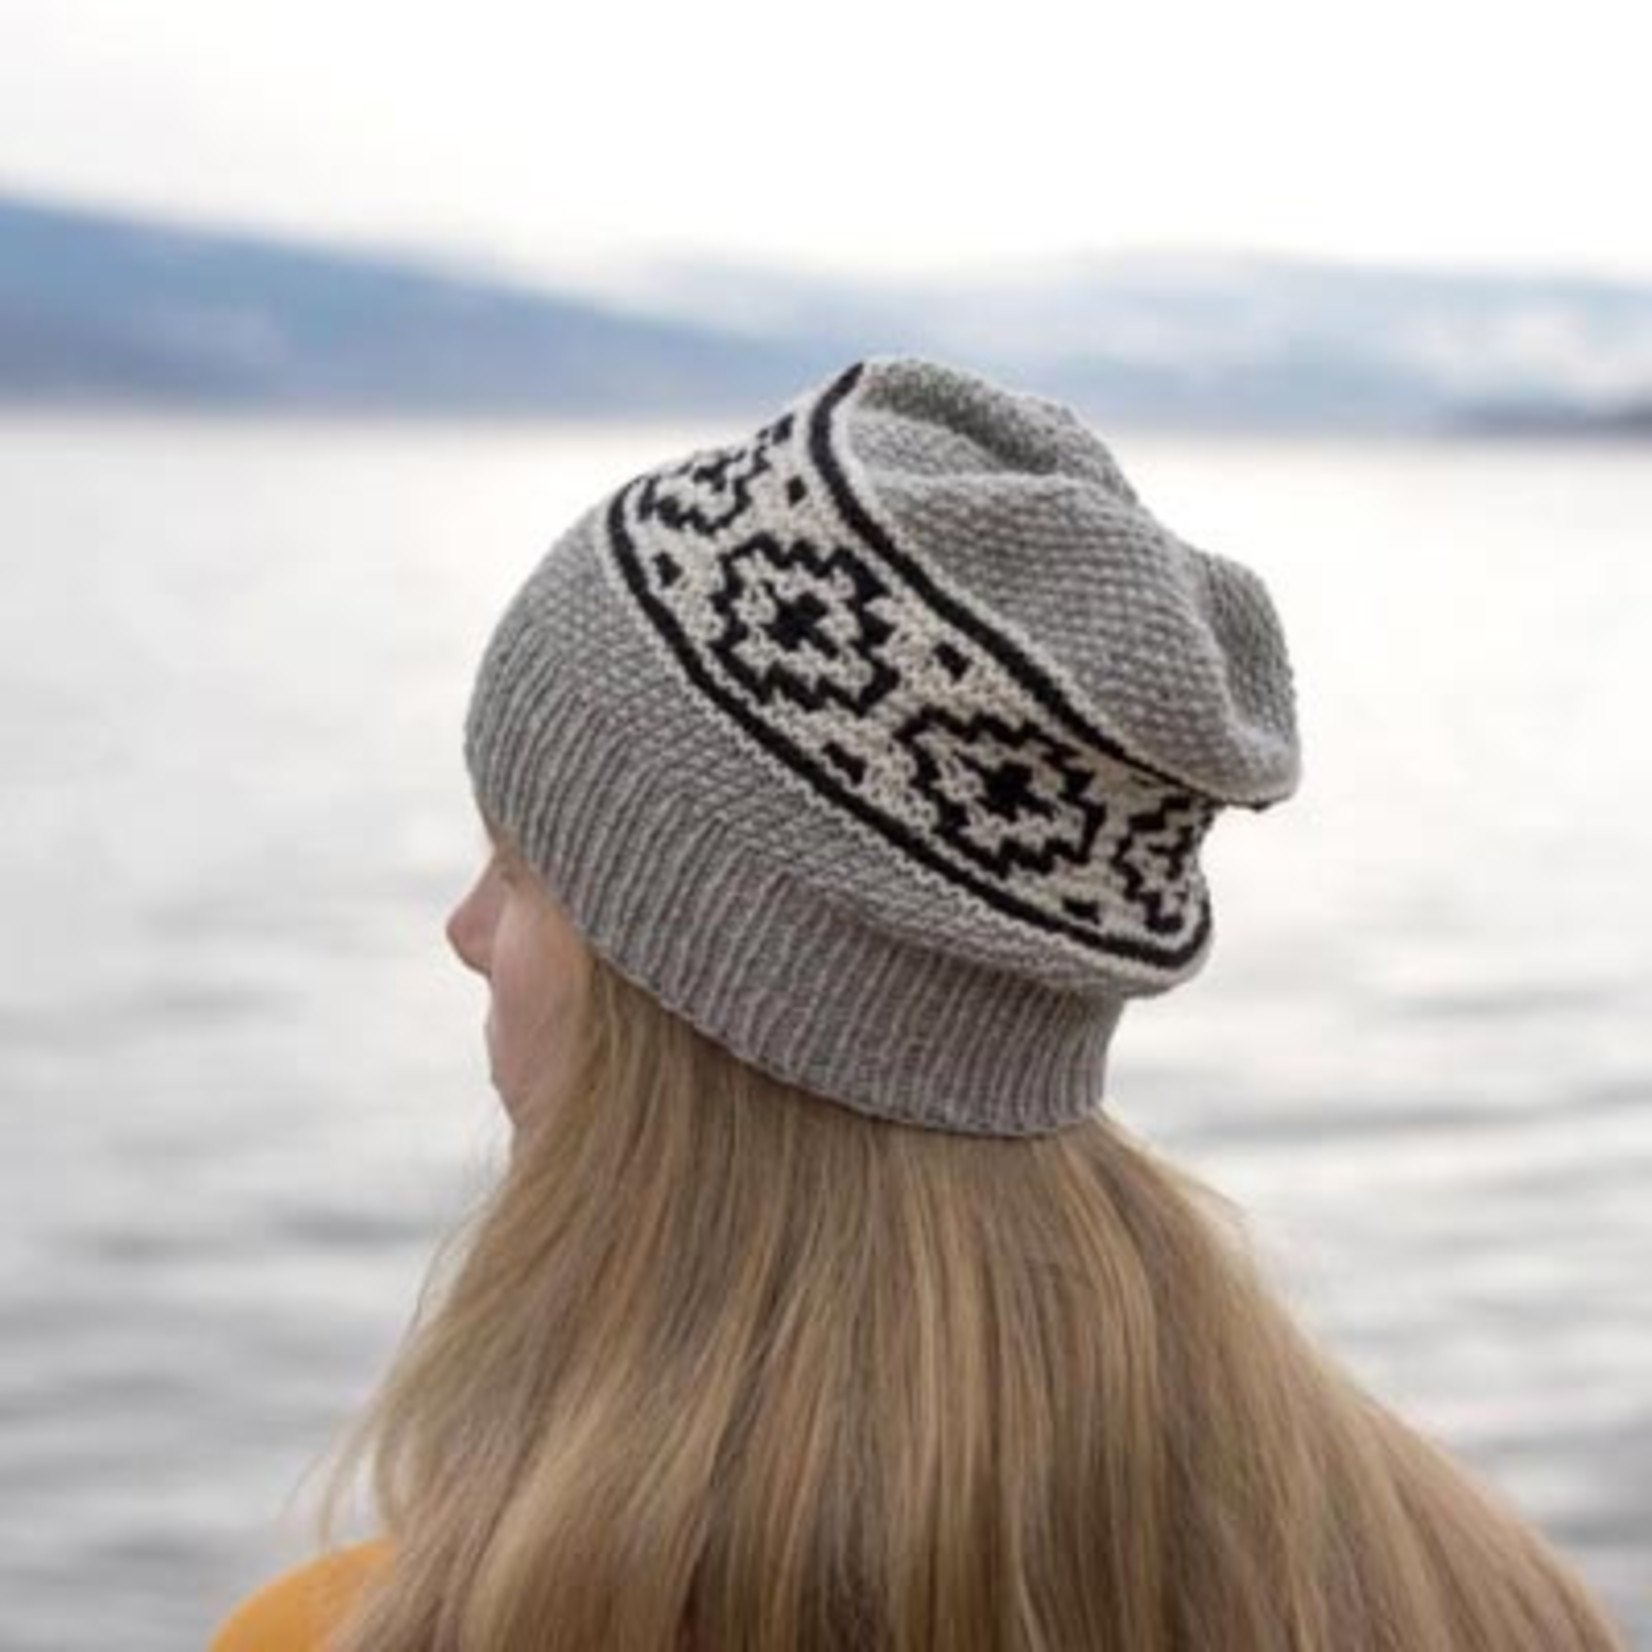 Estelle Yarns Antlers Beach Hat and Cowl Kit (pattern not incl)